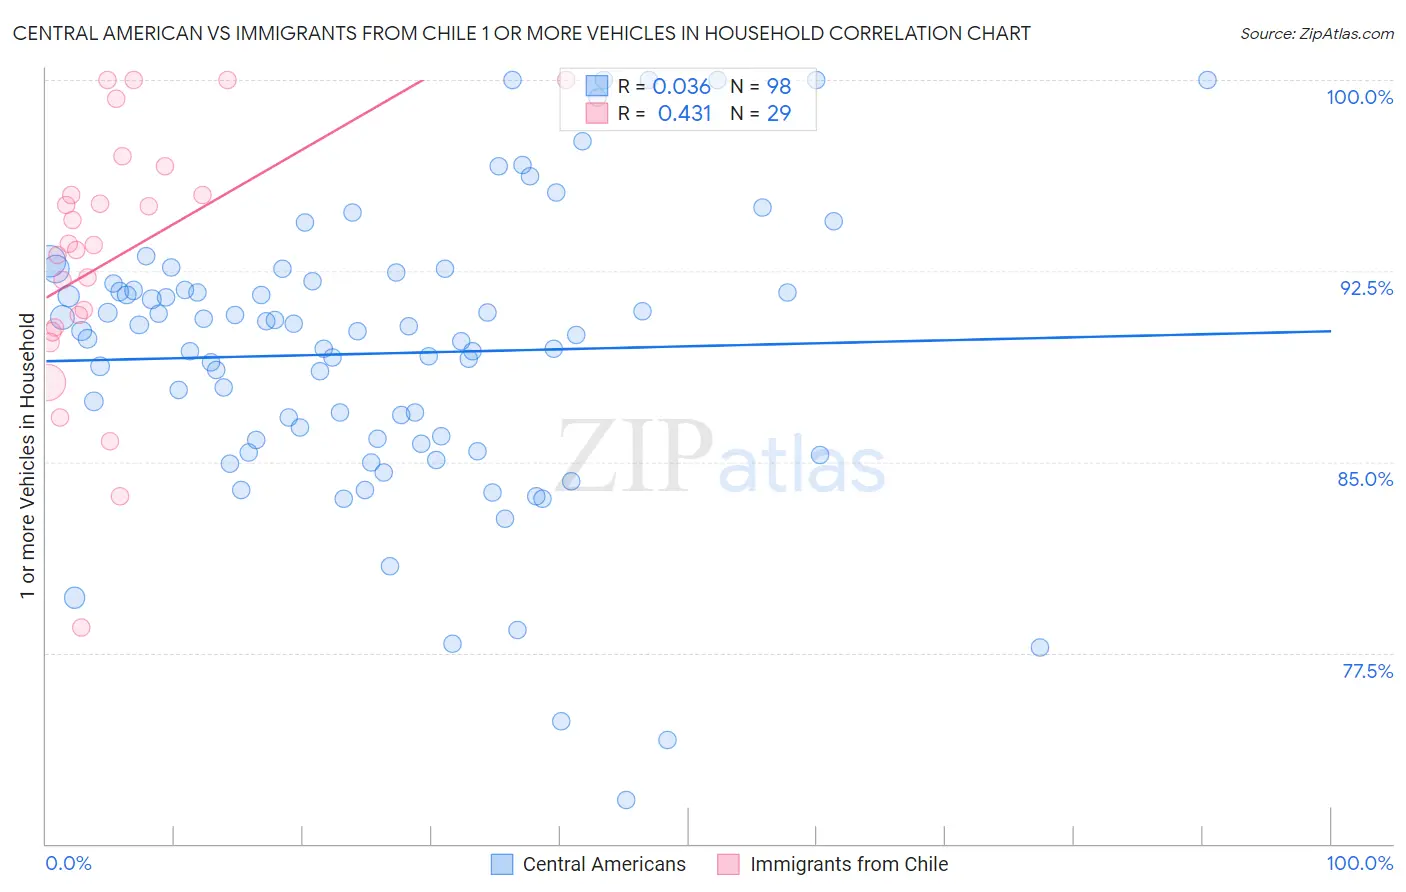 Central American vs Immigrants from Chile 1 or more Vehicles in Household